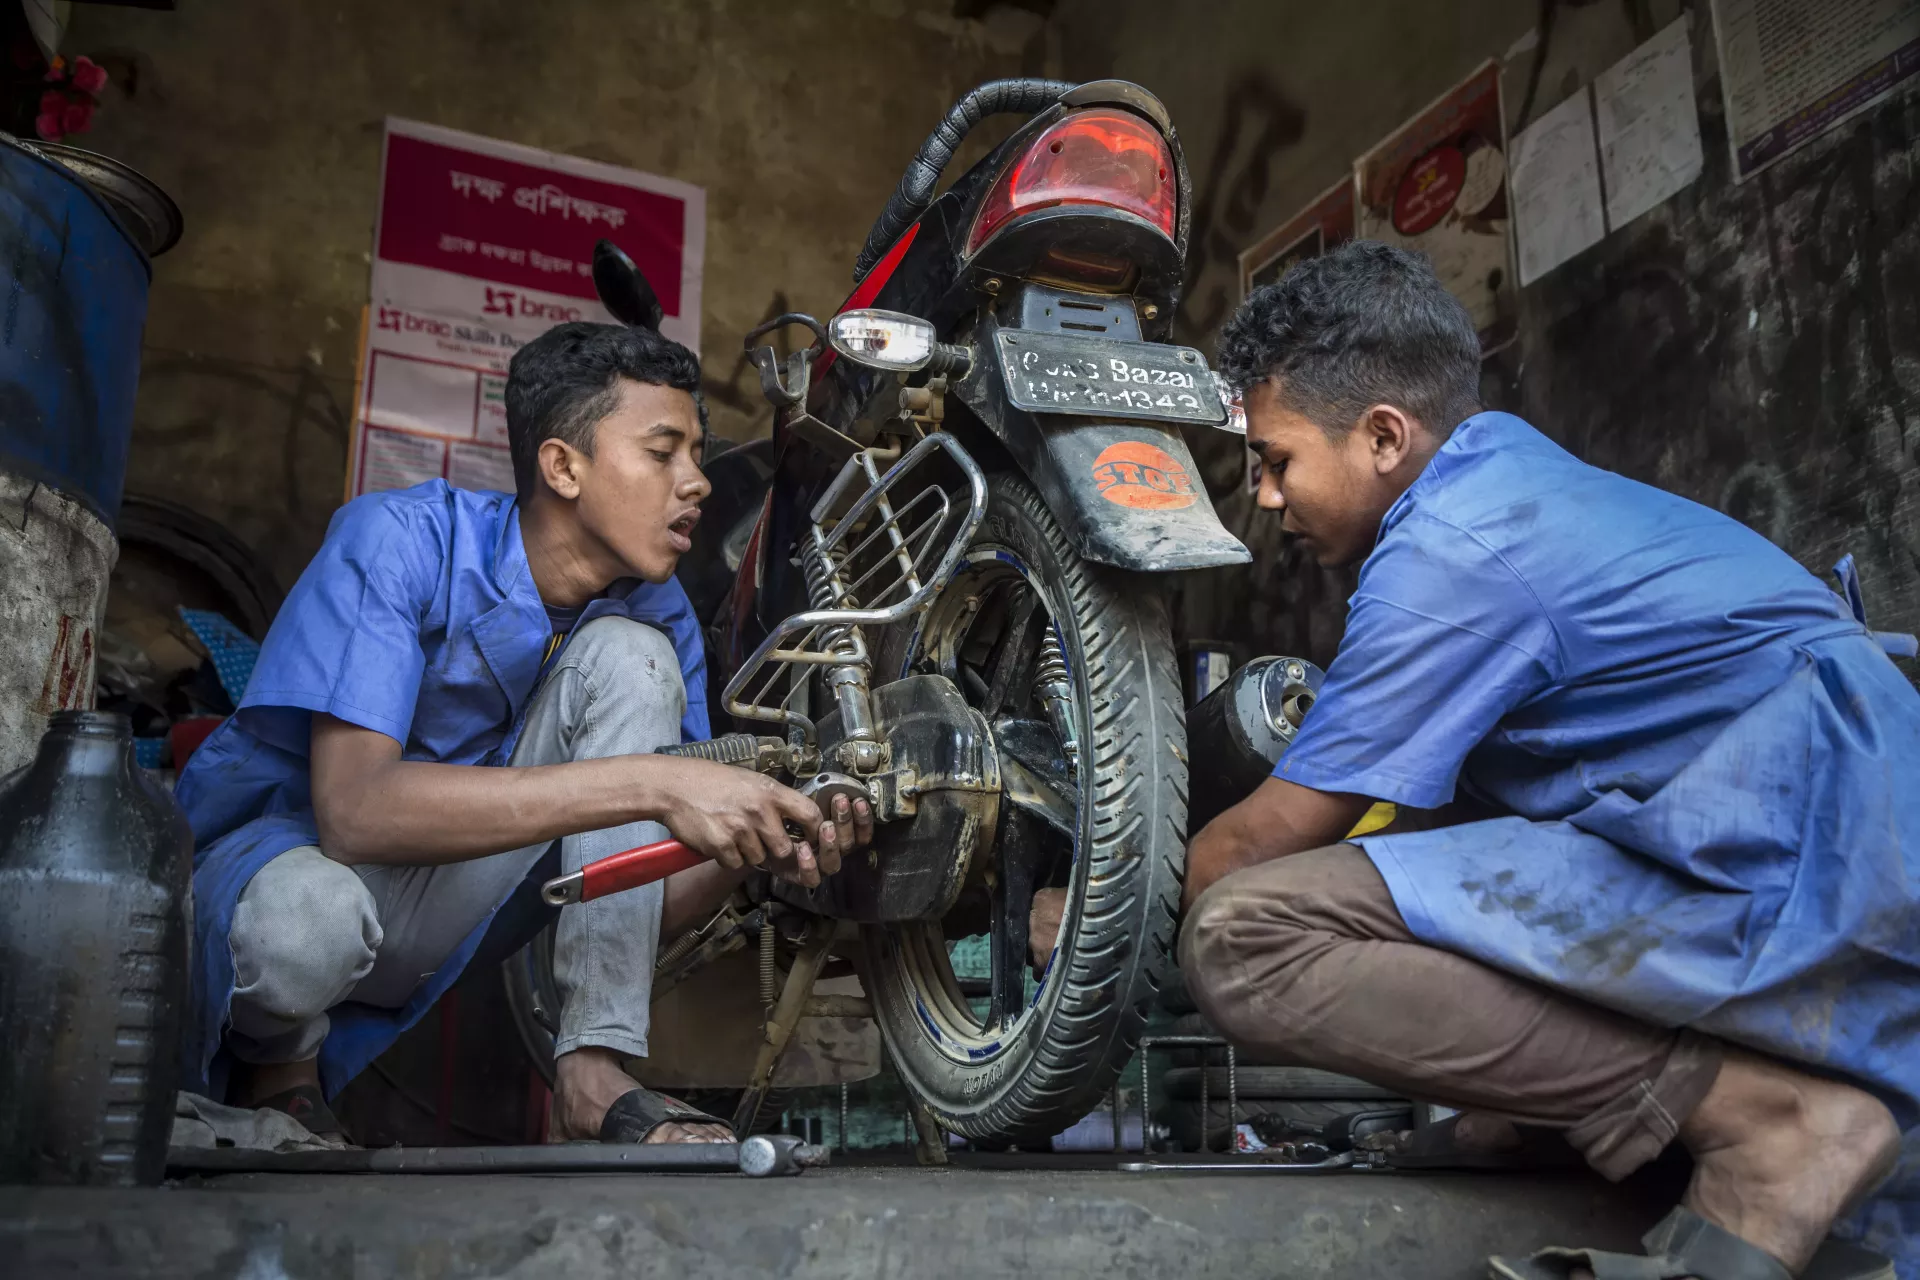 On 20 February 2019 in Bangladesh, (left-right) Mohammed Forhad and Biplob Barca, both 18 years old, work on a motorbike in a garage in Court Bazar, in the Cox's Bazar district.